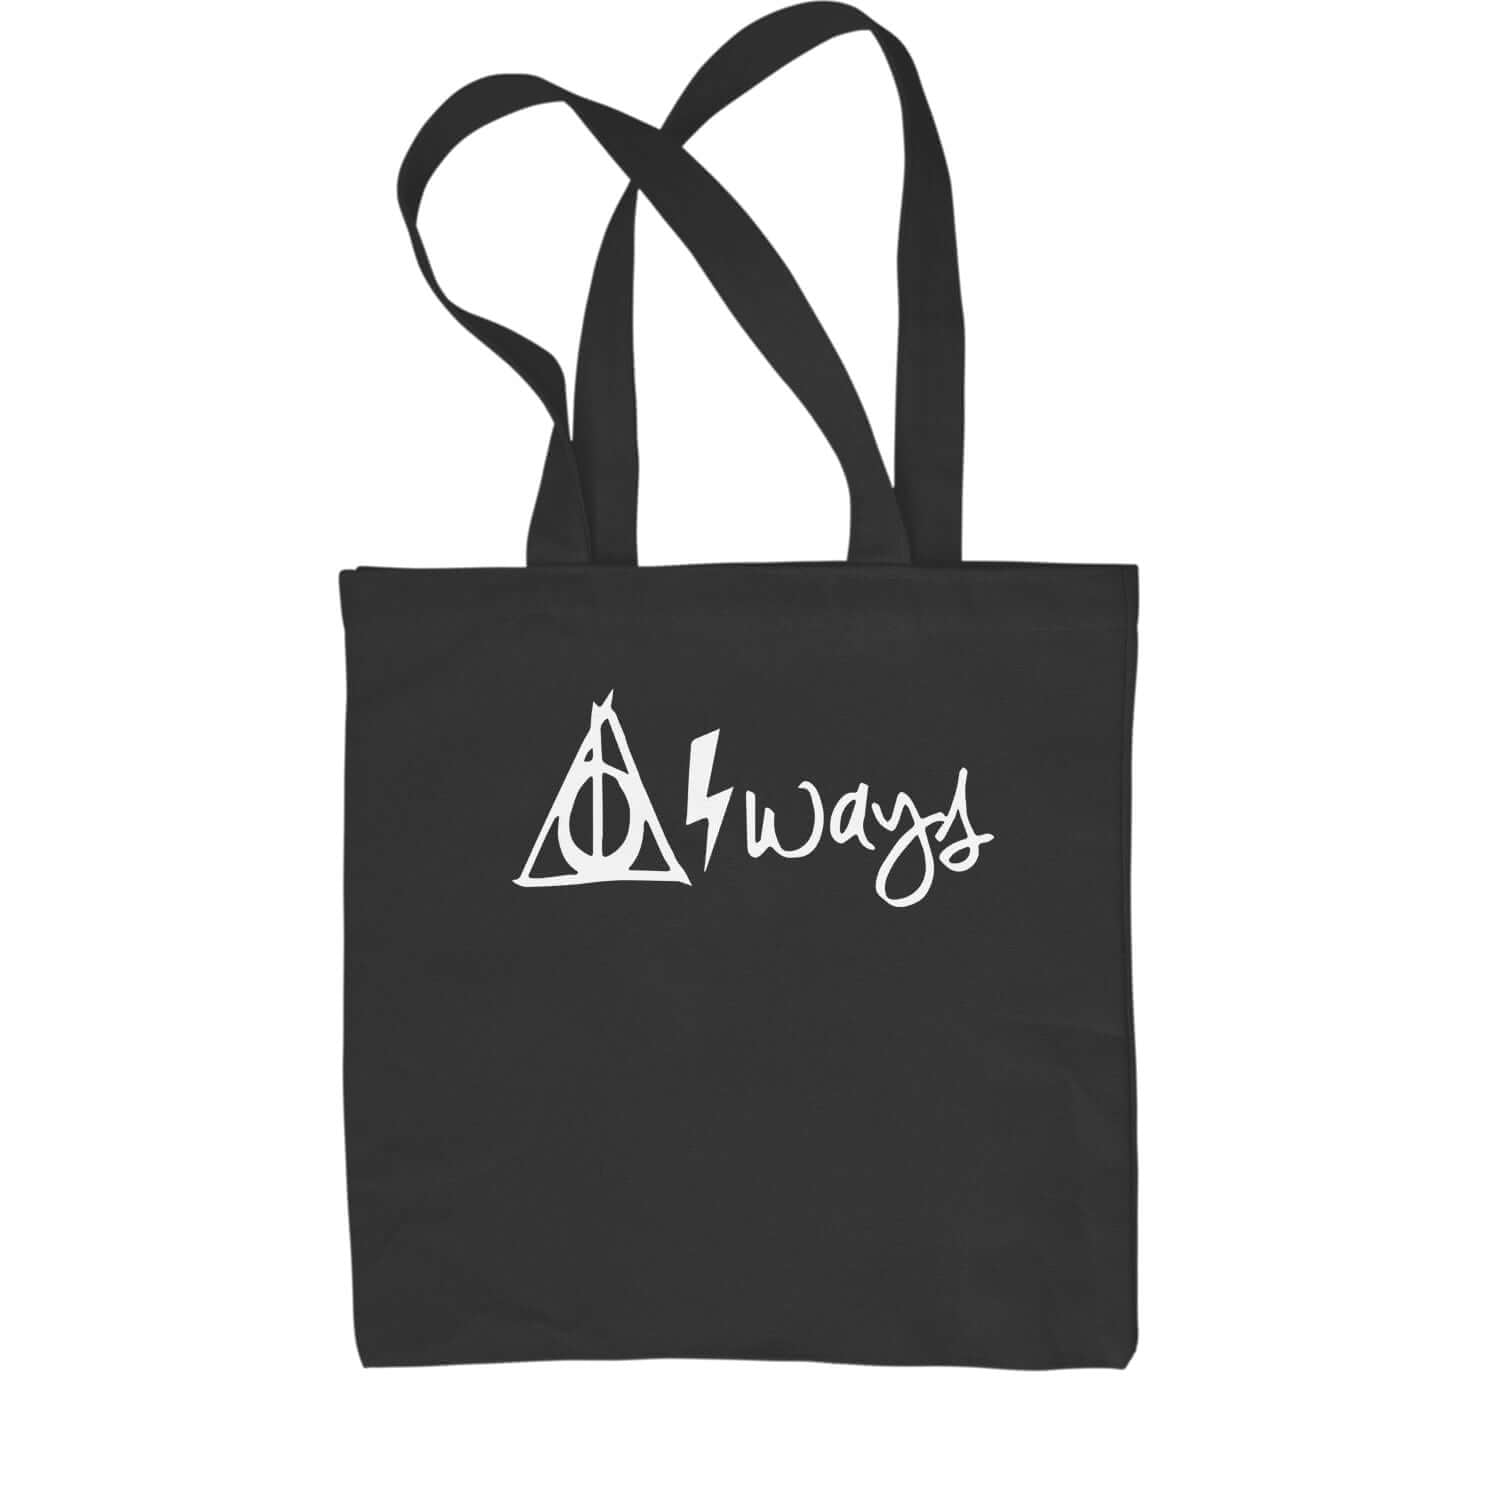 Always Lightning Bolt Shopping Tote Bag #expressiontees by Expression Tees